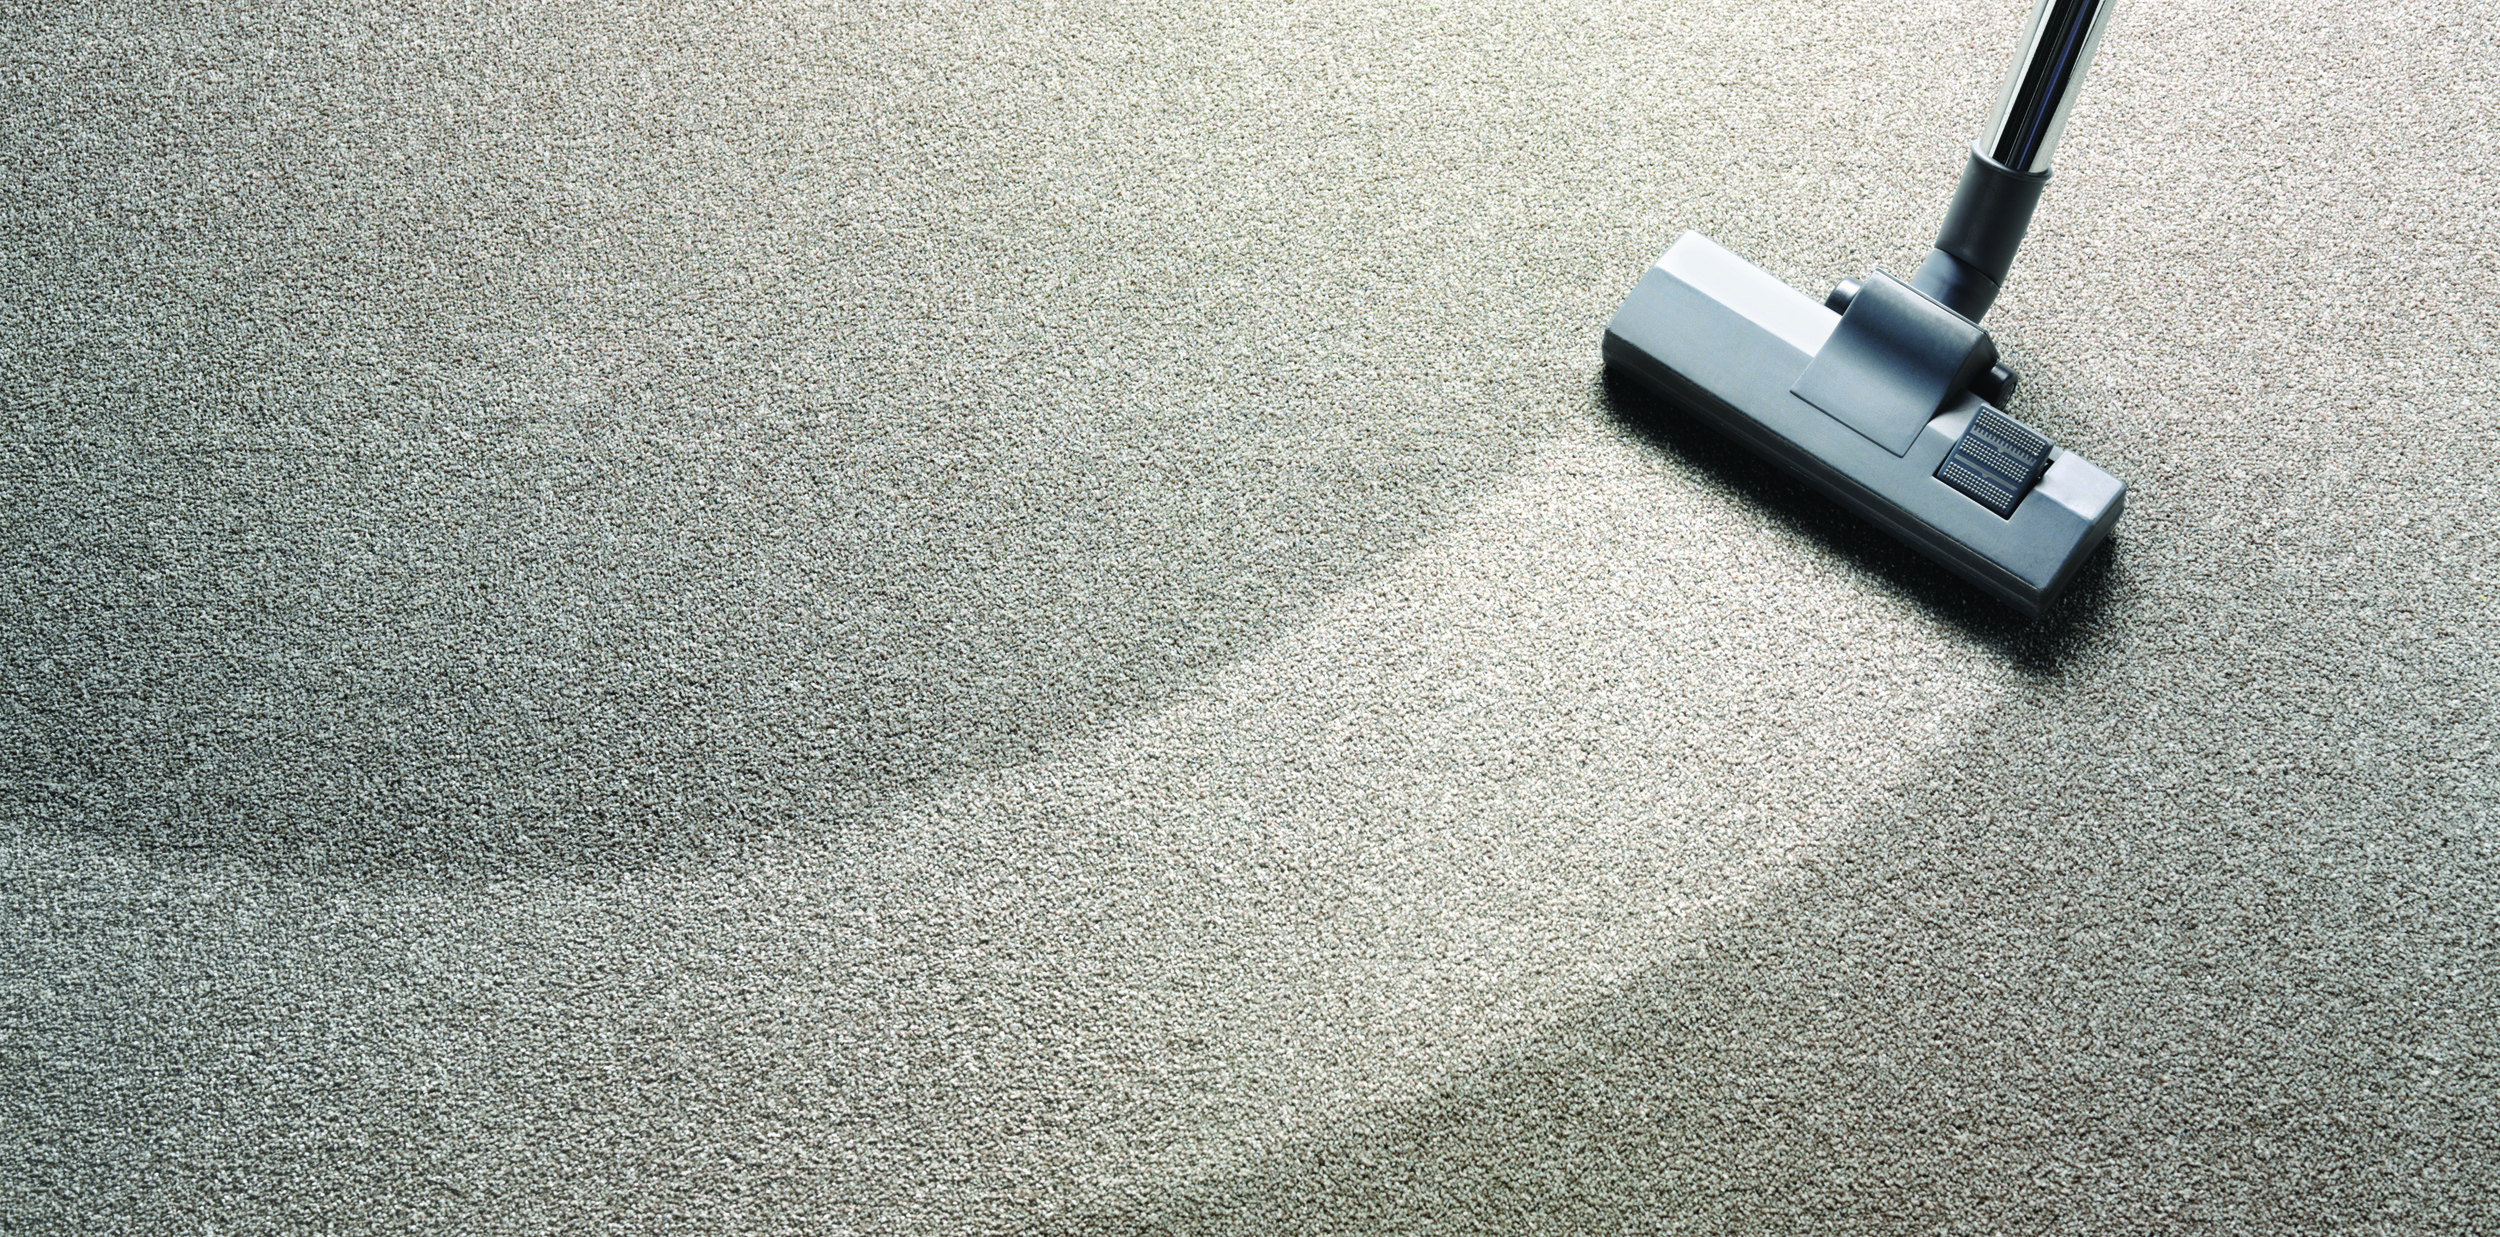 Professional Carpet Cleaning Services In Bloomington Il